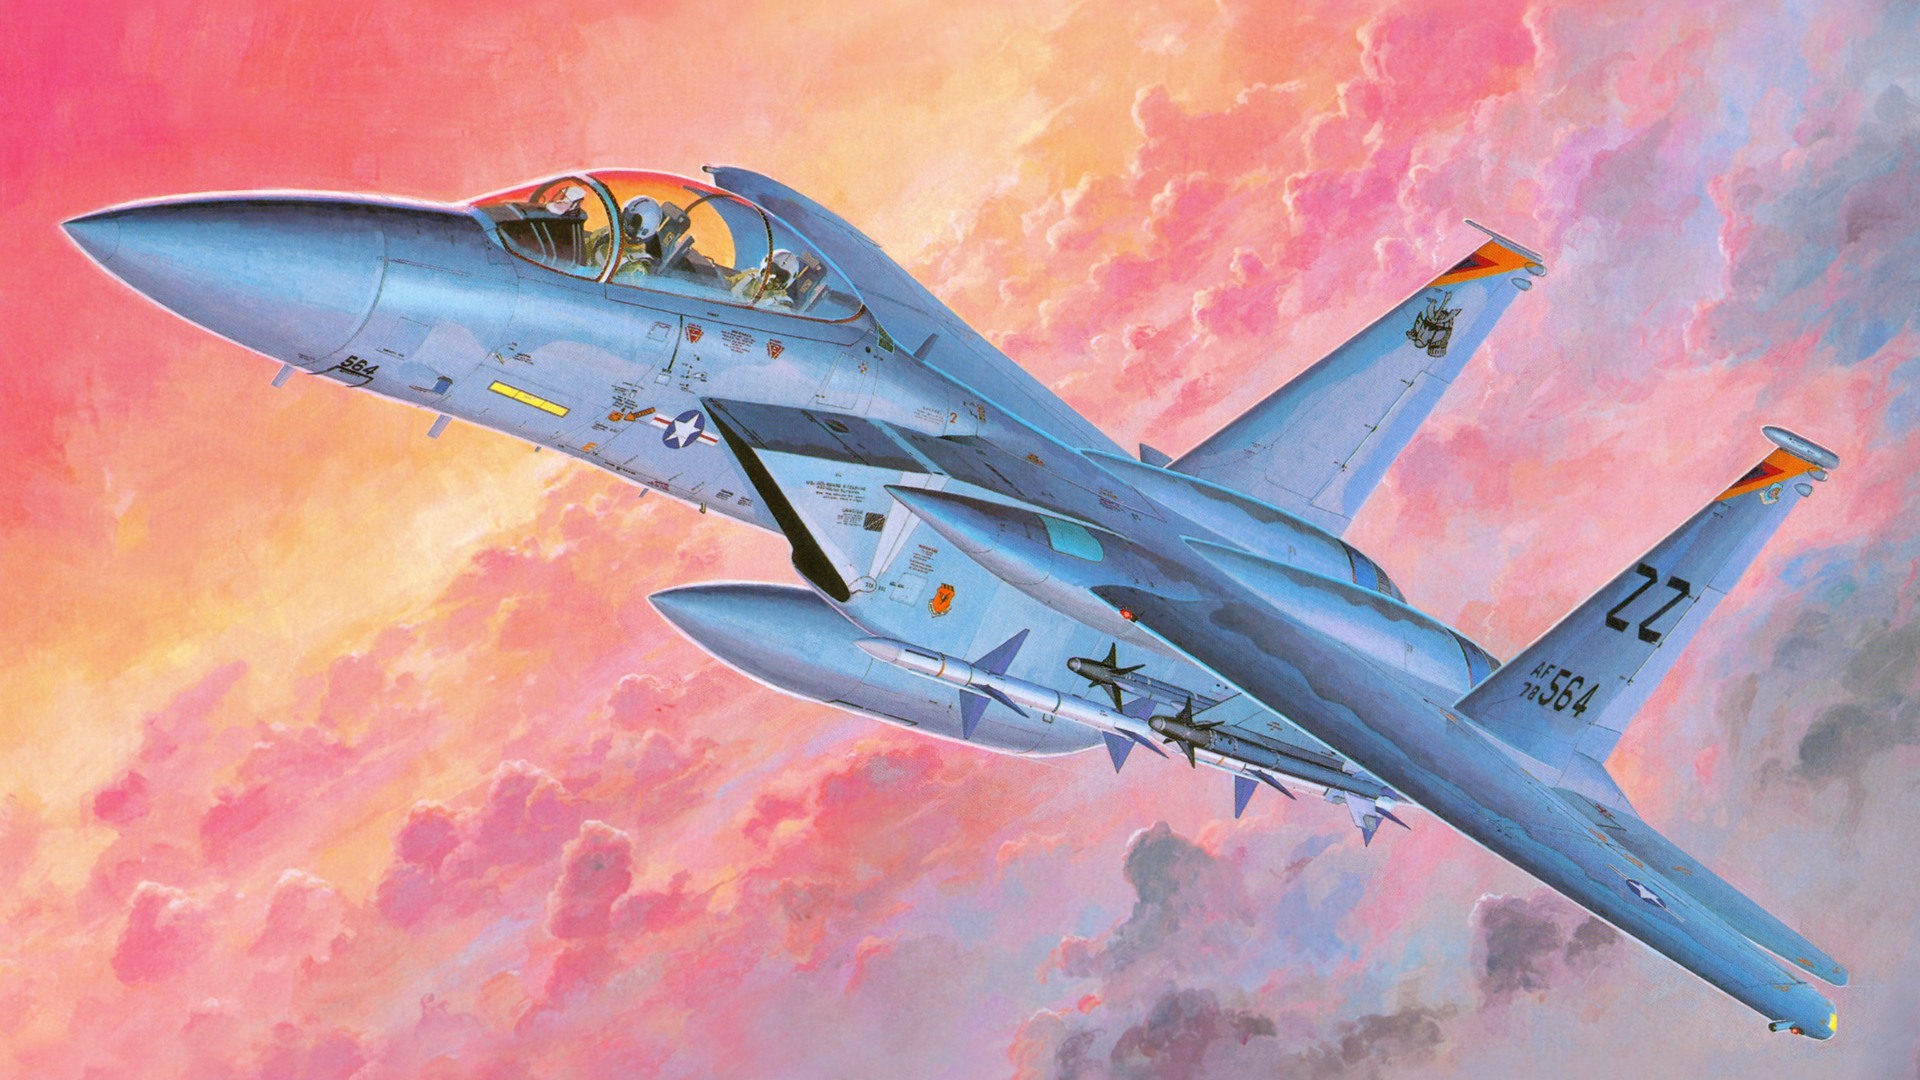 Military aircraft flight exquisite painting wallpapers #15 - 1920x1080